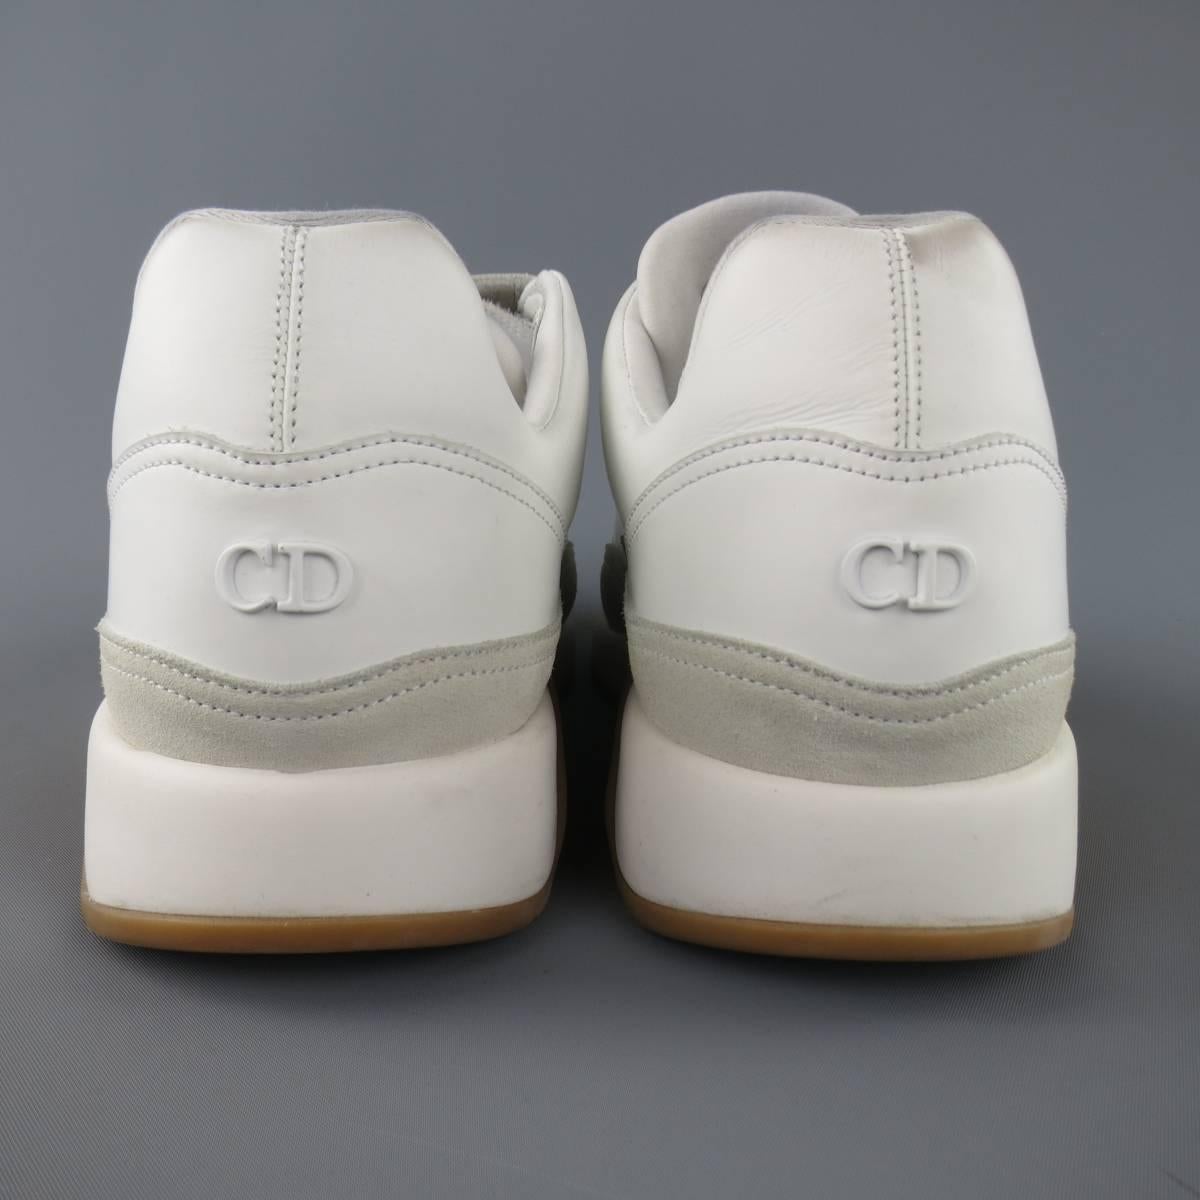 dior sneakers bottom